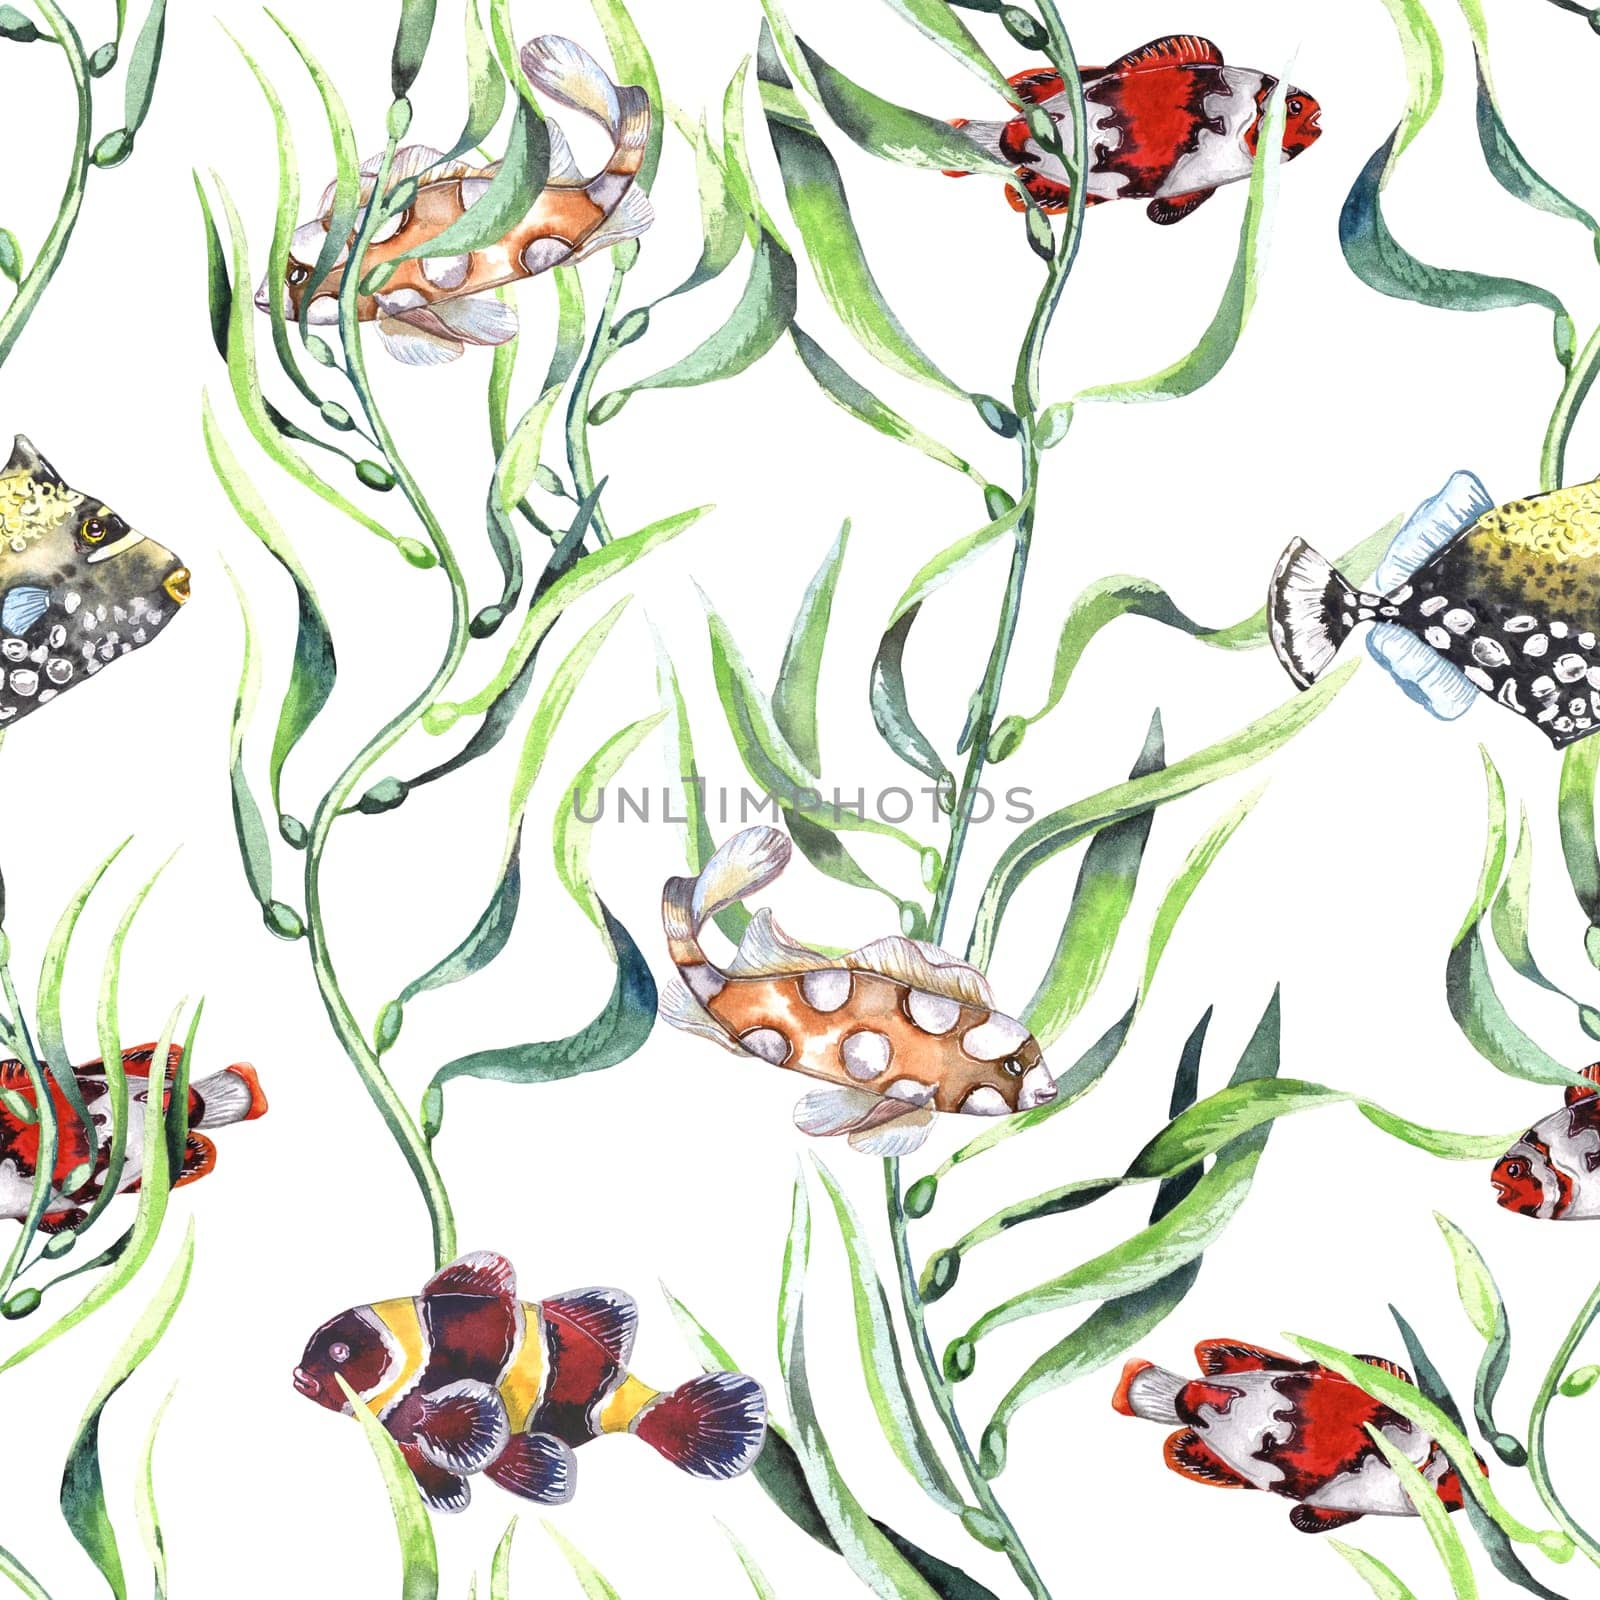 Watercolor stylish seamless pattern with fishes and seaweeds. Hand drawn illustration